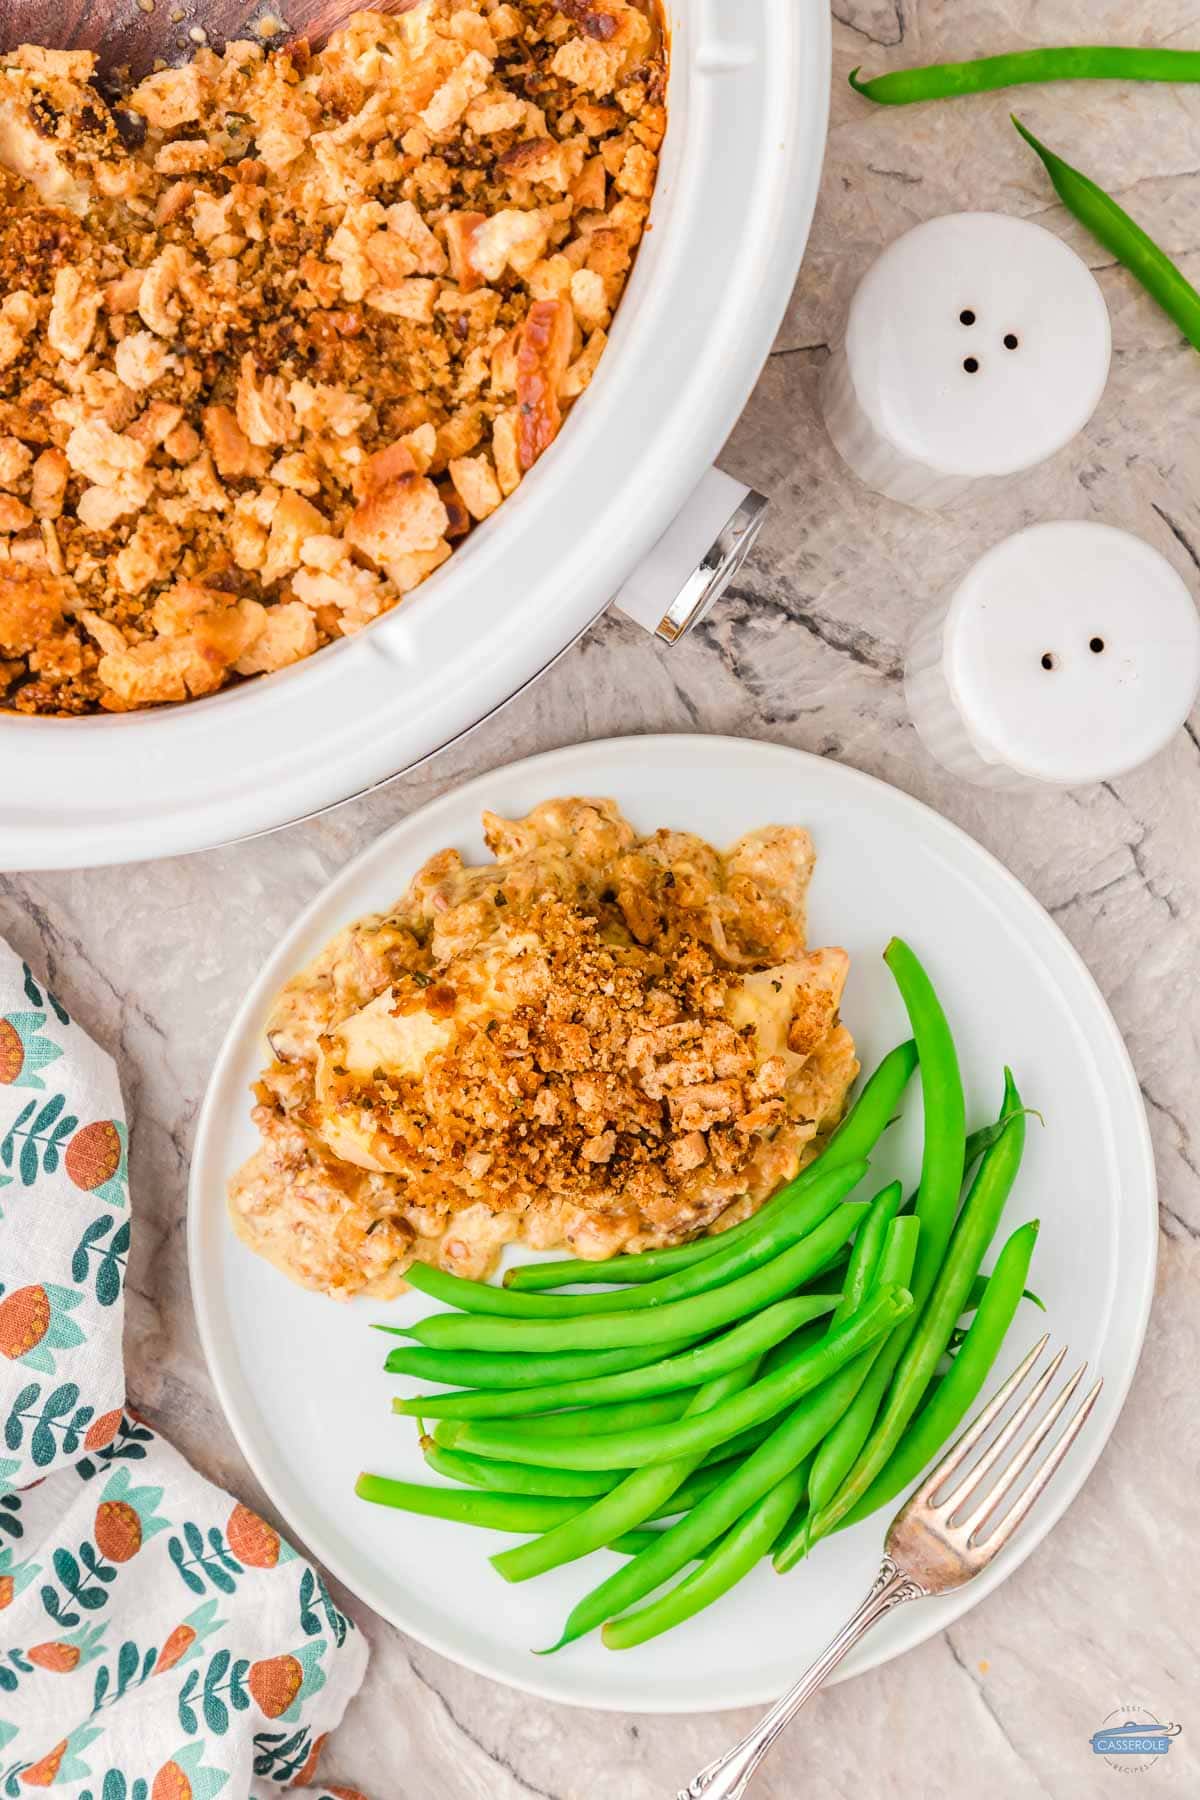 serve any of these casseroles with your favorite veggies. I like steamed green beans because they are easier and the kids will eat them.